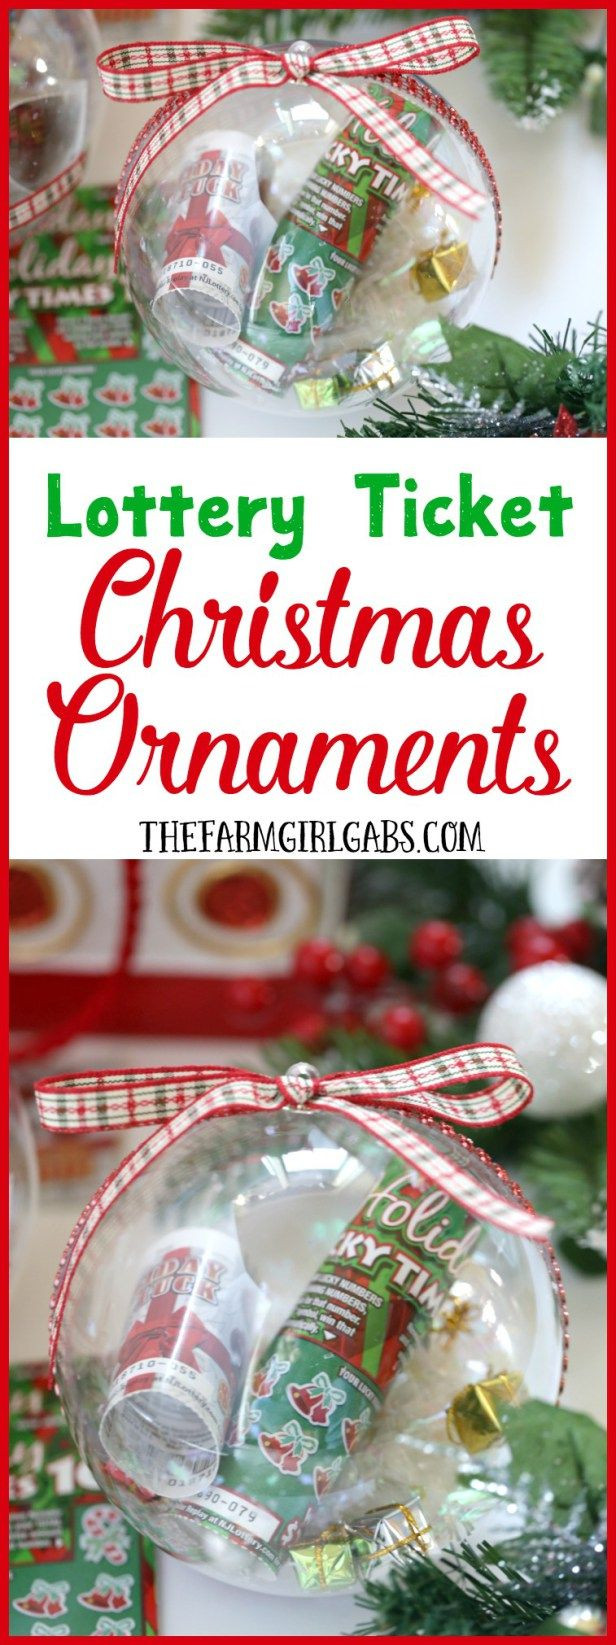 Lottery Ticket Christmas Gift Ideas
 Lottery Ticket Christmas Ornaments t ideas